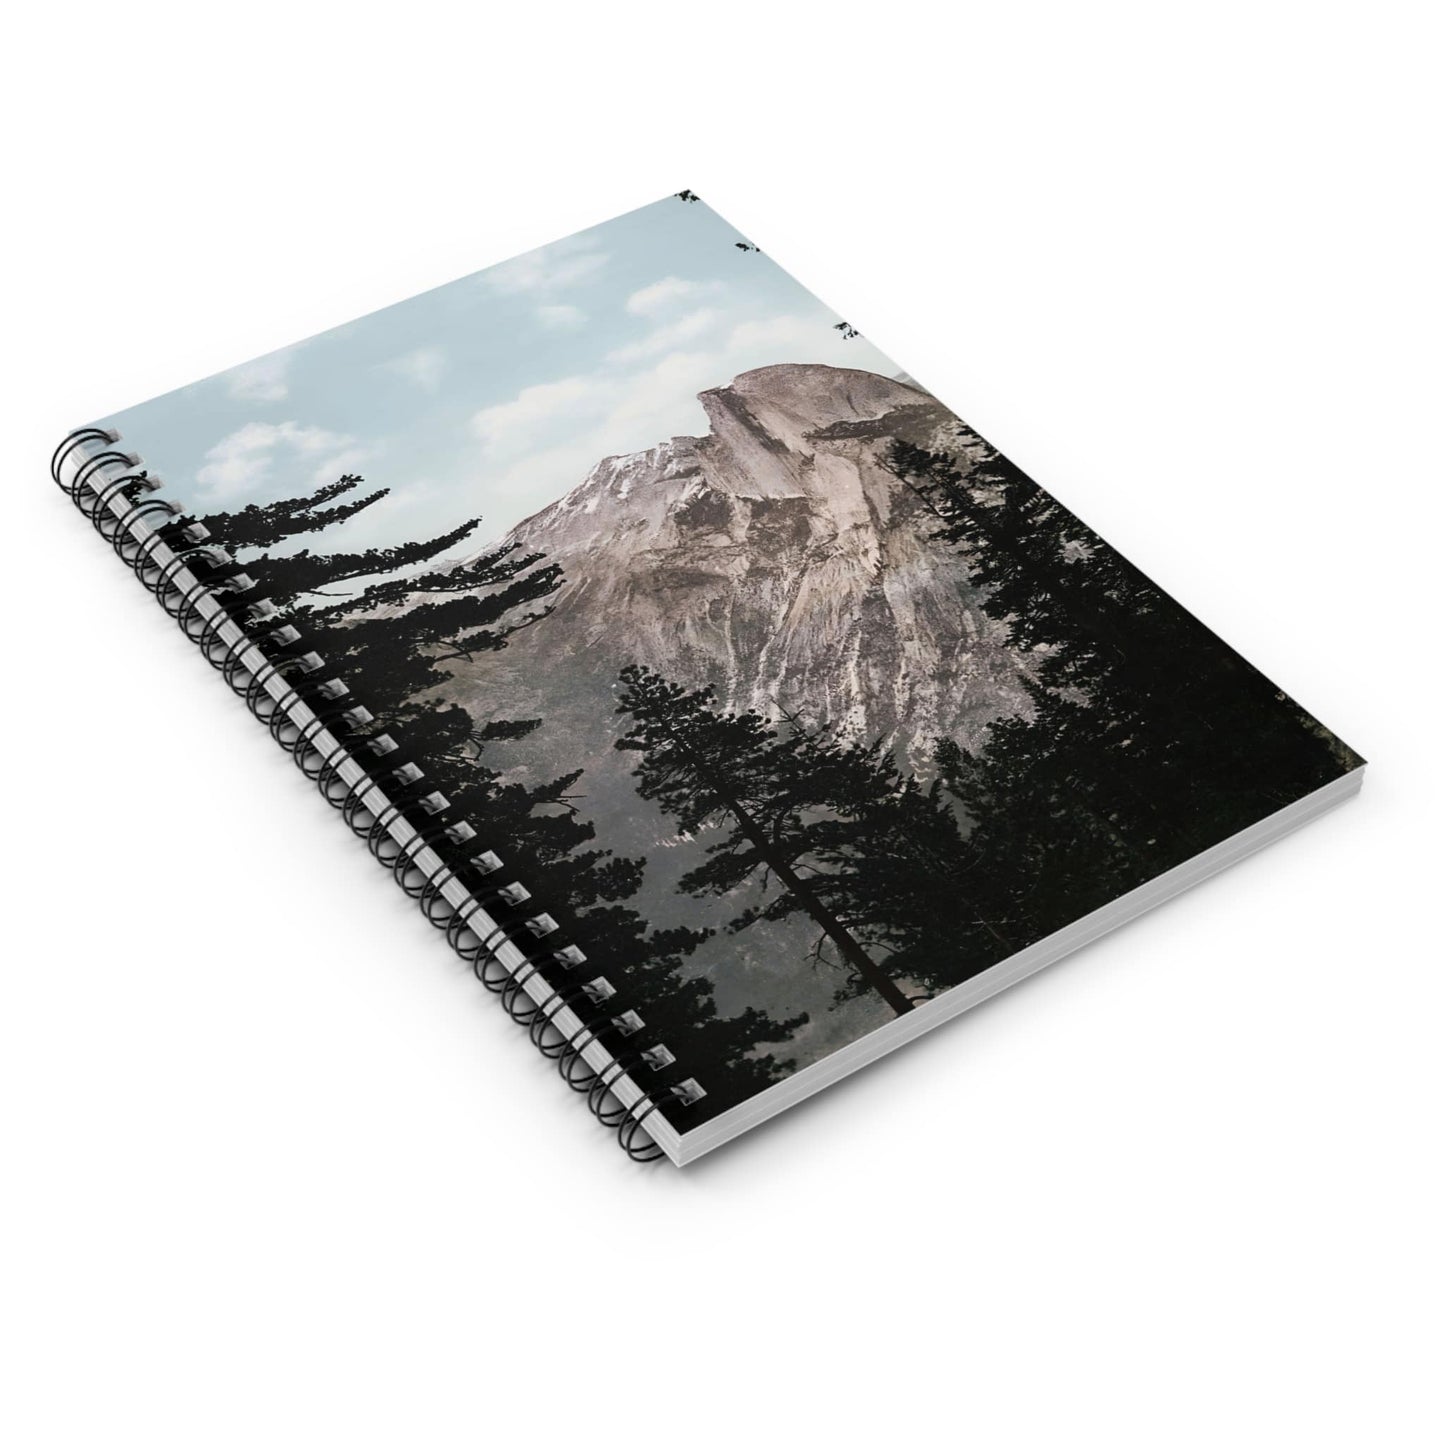 Forest and Mountains Spiral Notebook Laying Flat on White Surface